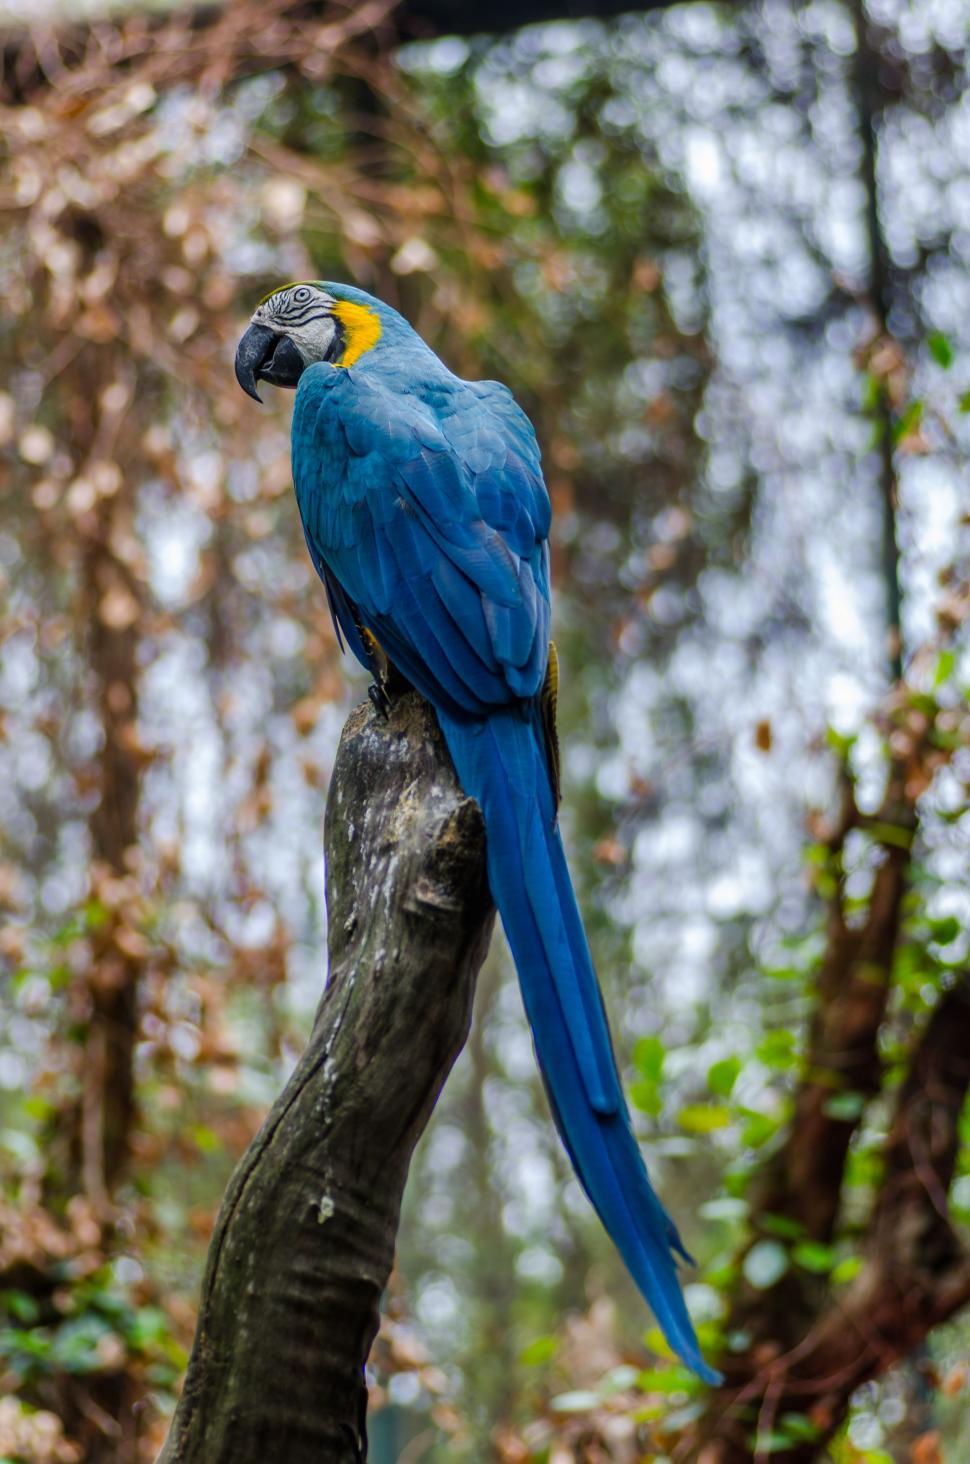 Free Image of Blue and Yellow Parrot Perched on Tree Branch 